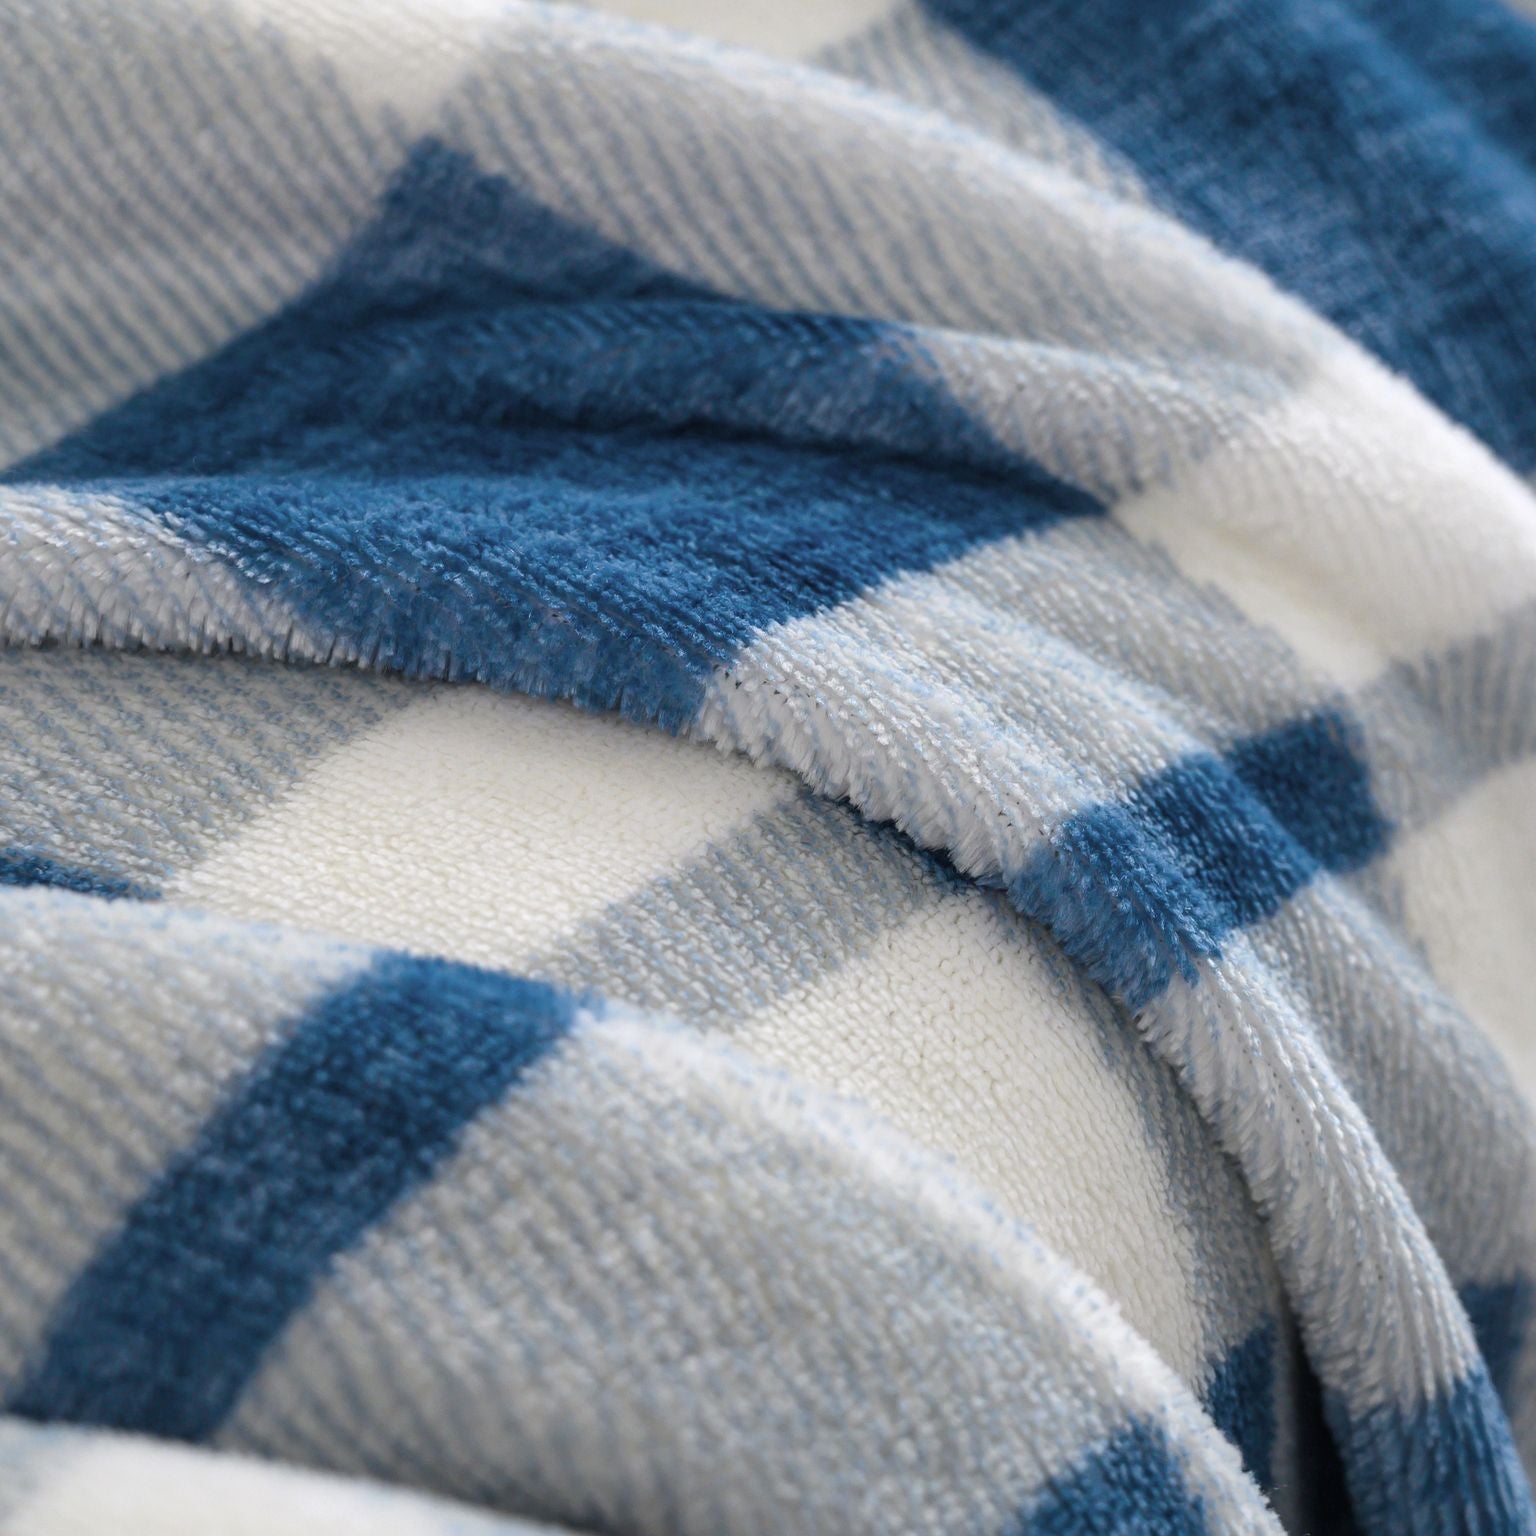 Printed Velvet to Solid Sherpa Throw Blanket 50 x 60 inches Classic Blue Plaid